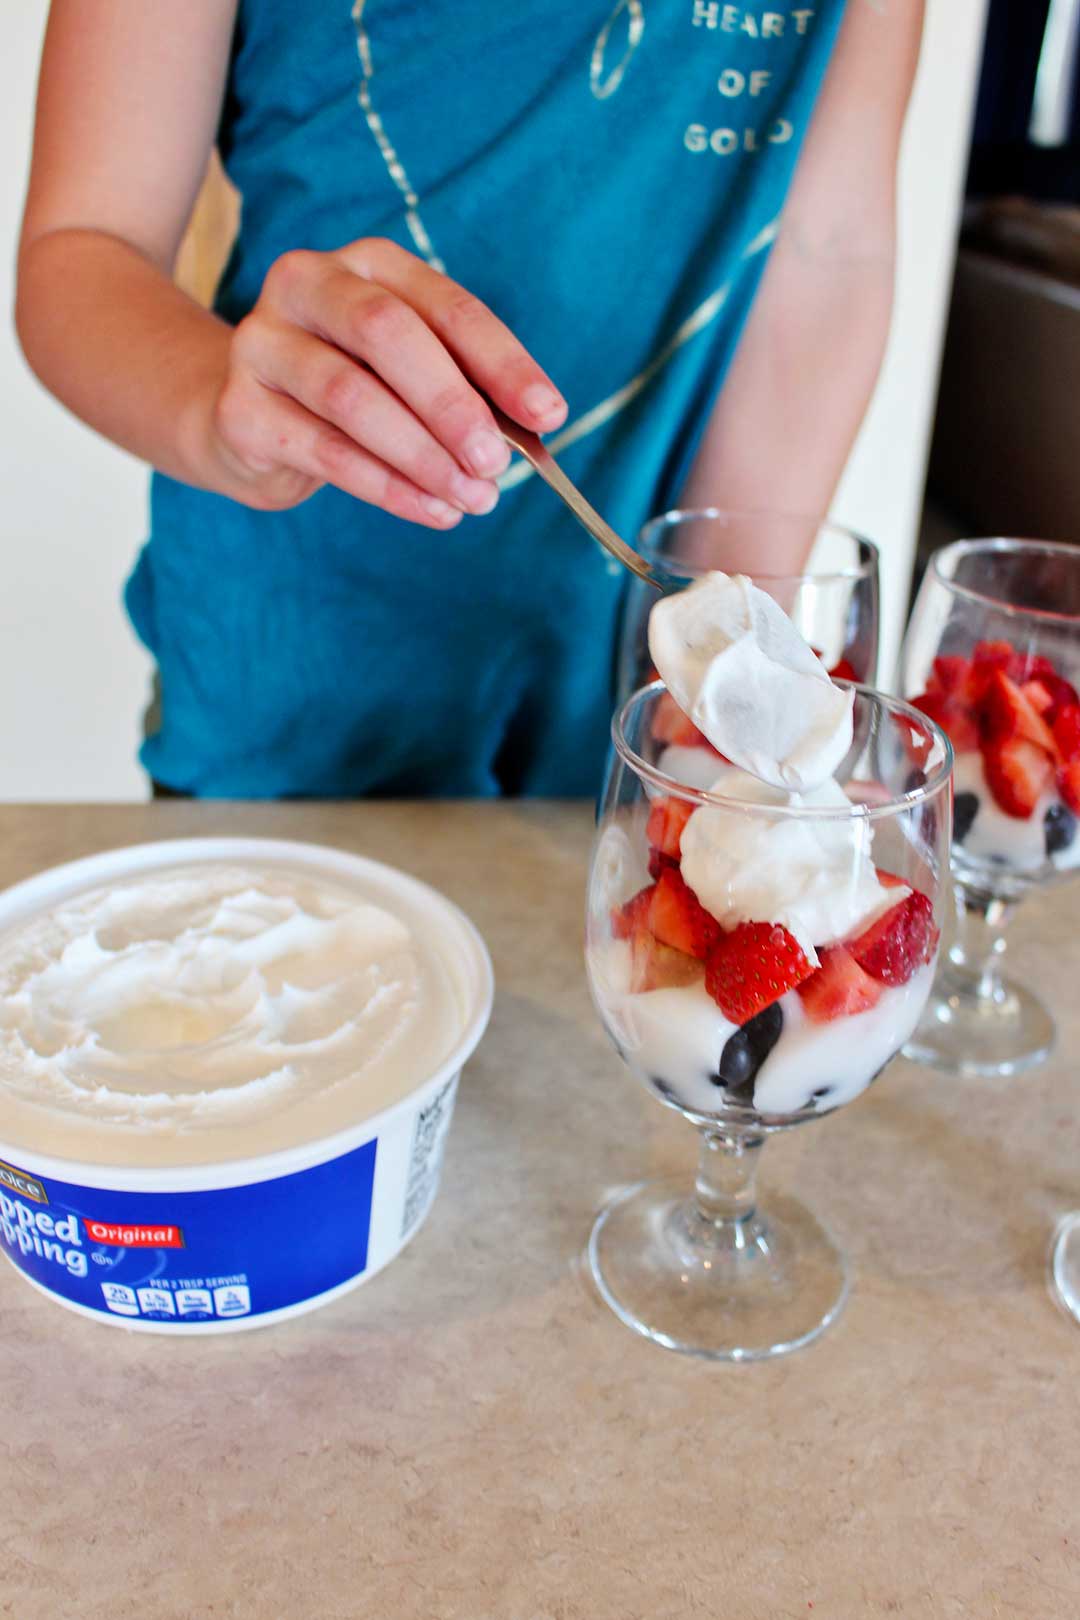 A child adding a scoop of whipped cream to a cup of red and blue fruit.